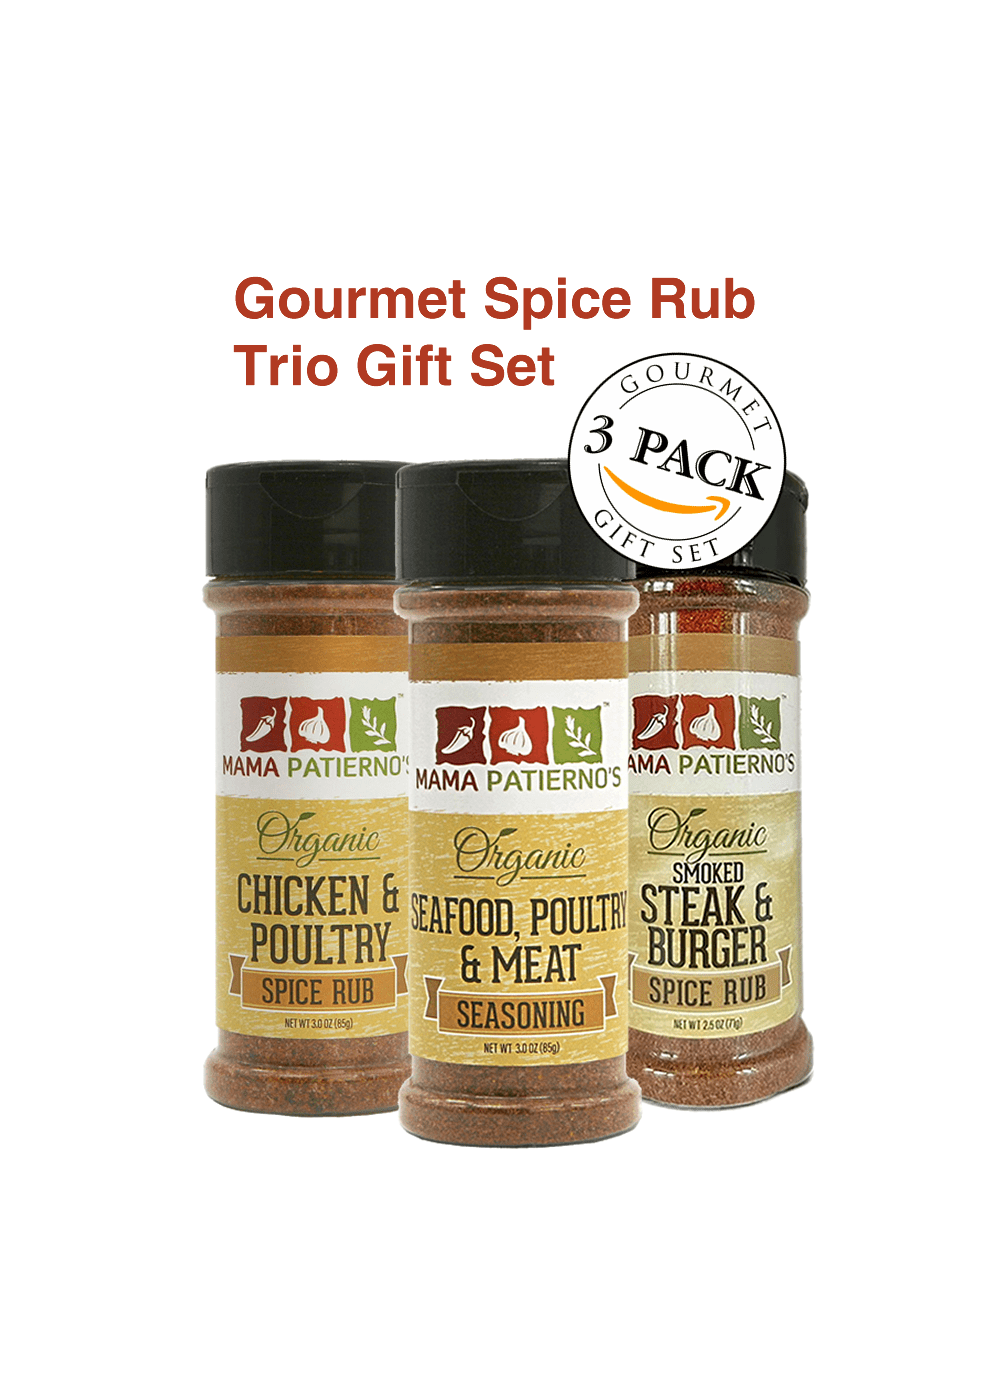 Organic Rub Trio for Steak, burgers, chicken, poultry, seafood and meats